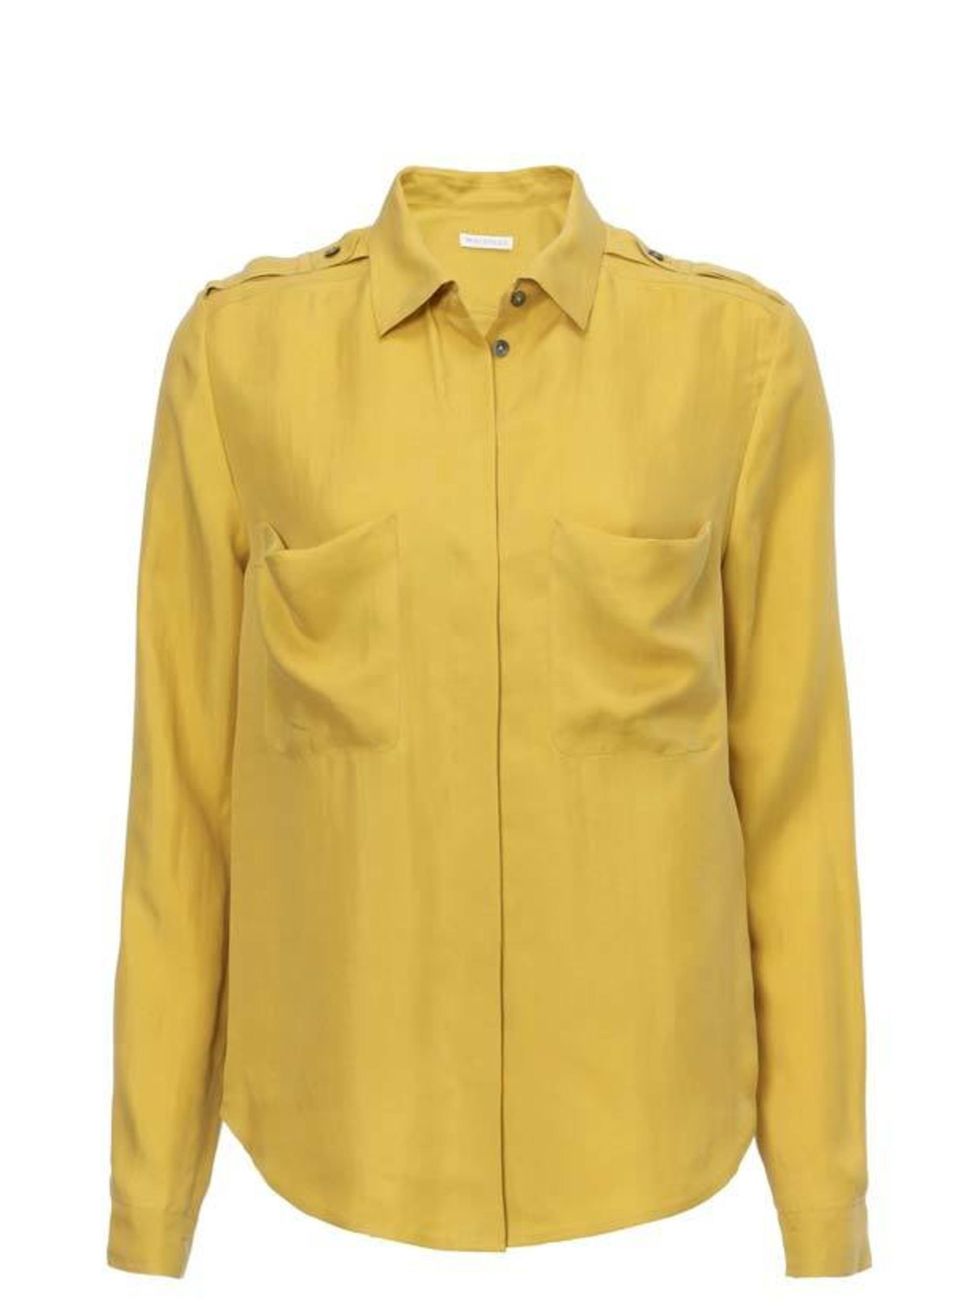 <p><a href="http://www.whistles.co.uk/fcp/categorylist/dept/shop?resetFilters=true">Whistles</a> mustard silk shirt, £95</p>